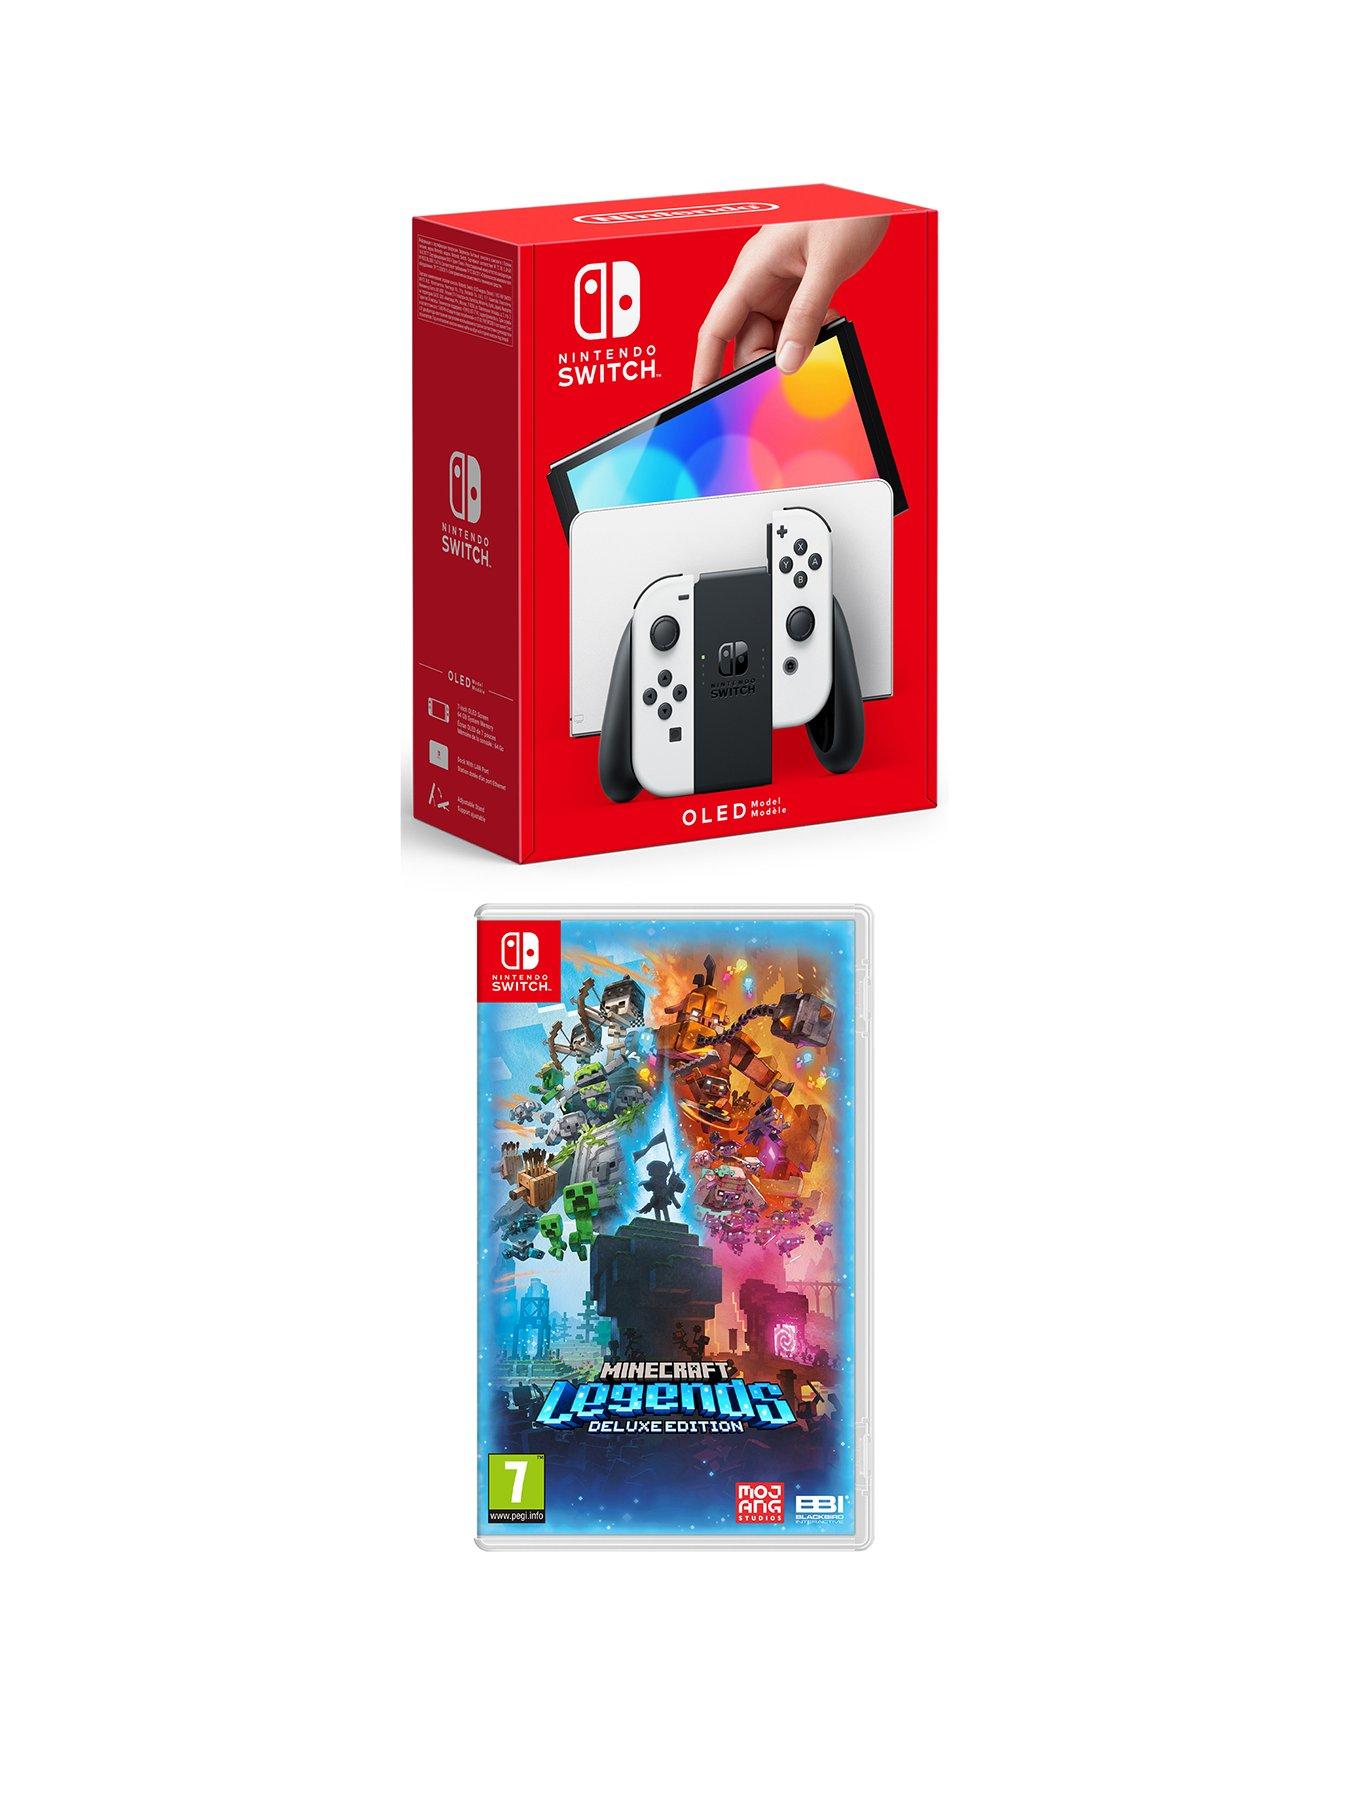 Minecraft Legends Deluxe Edition Nintendo Switch – OLED Model